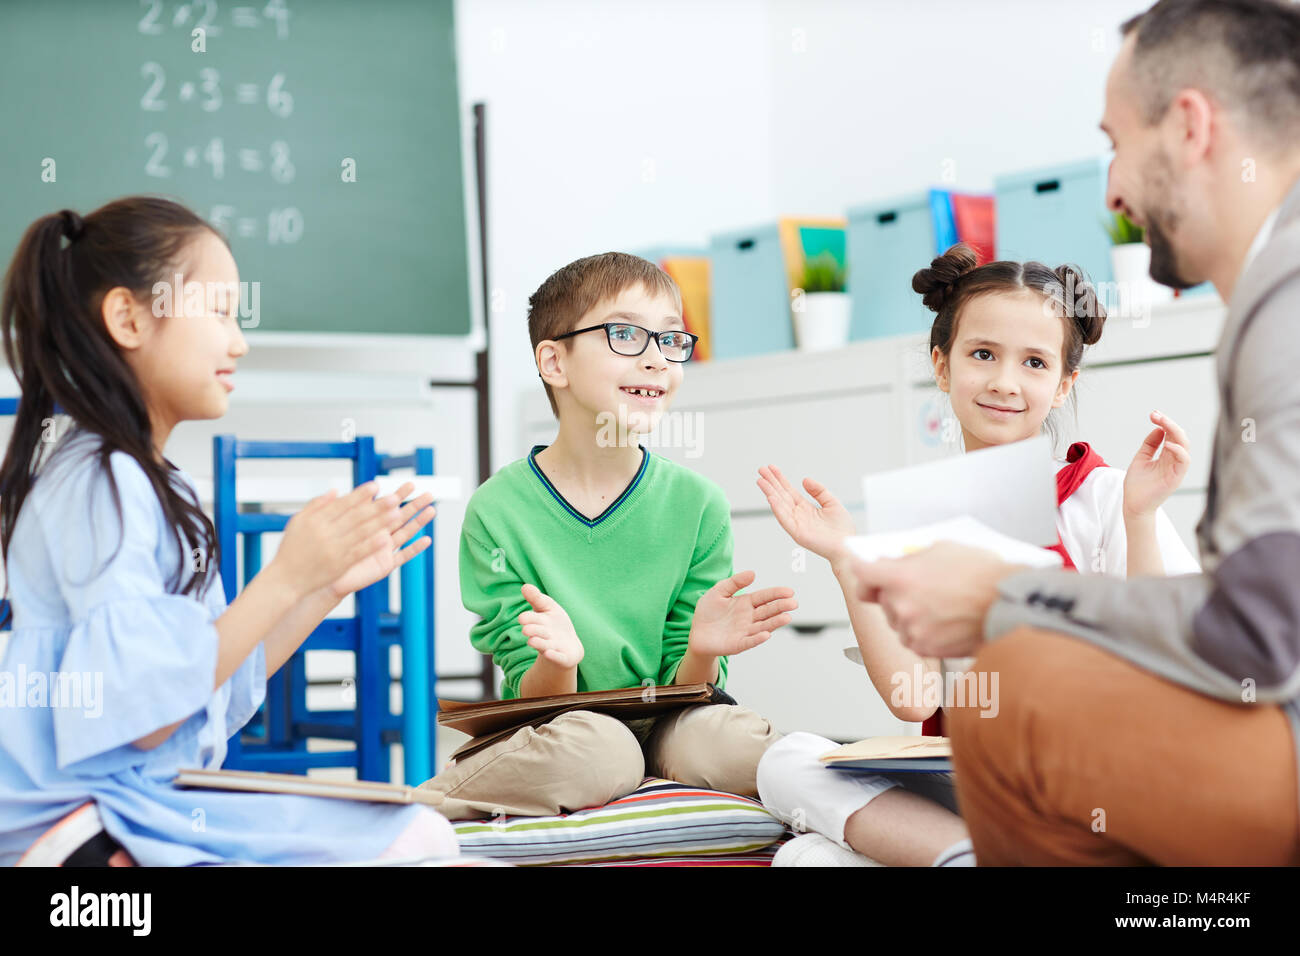 Kids clapping hands Stock Photo